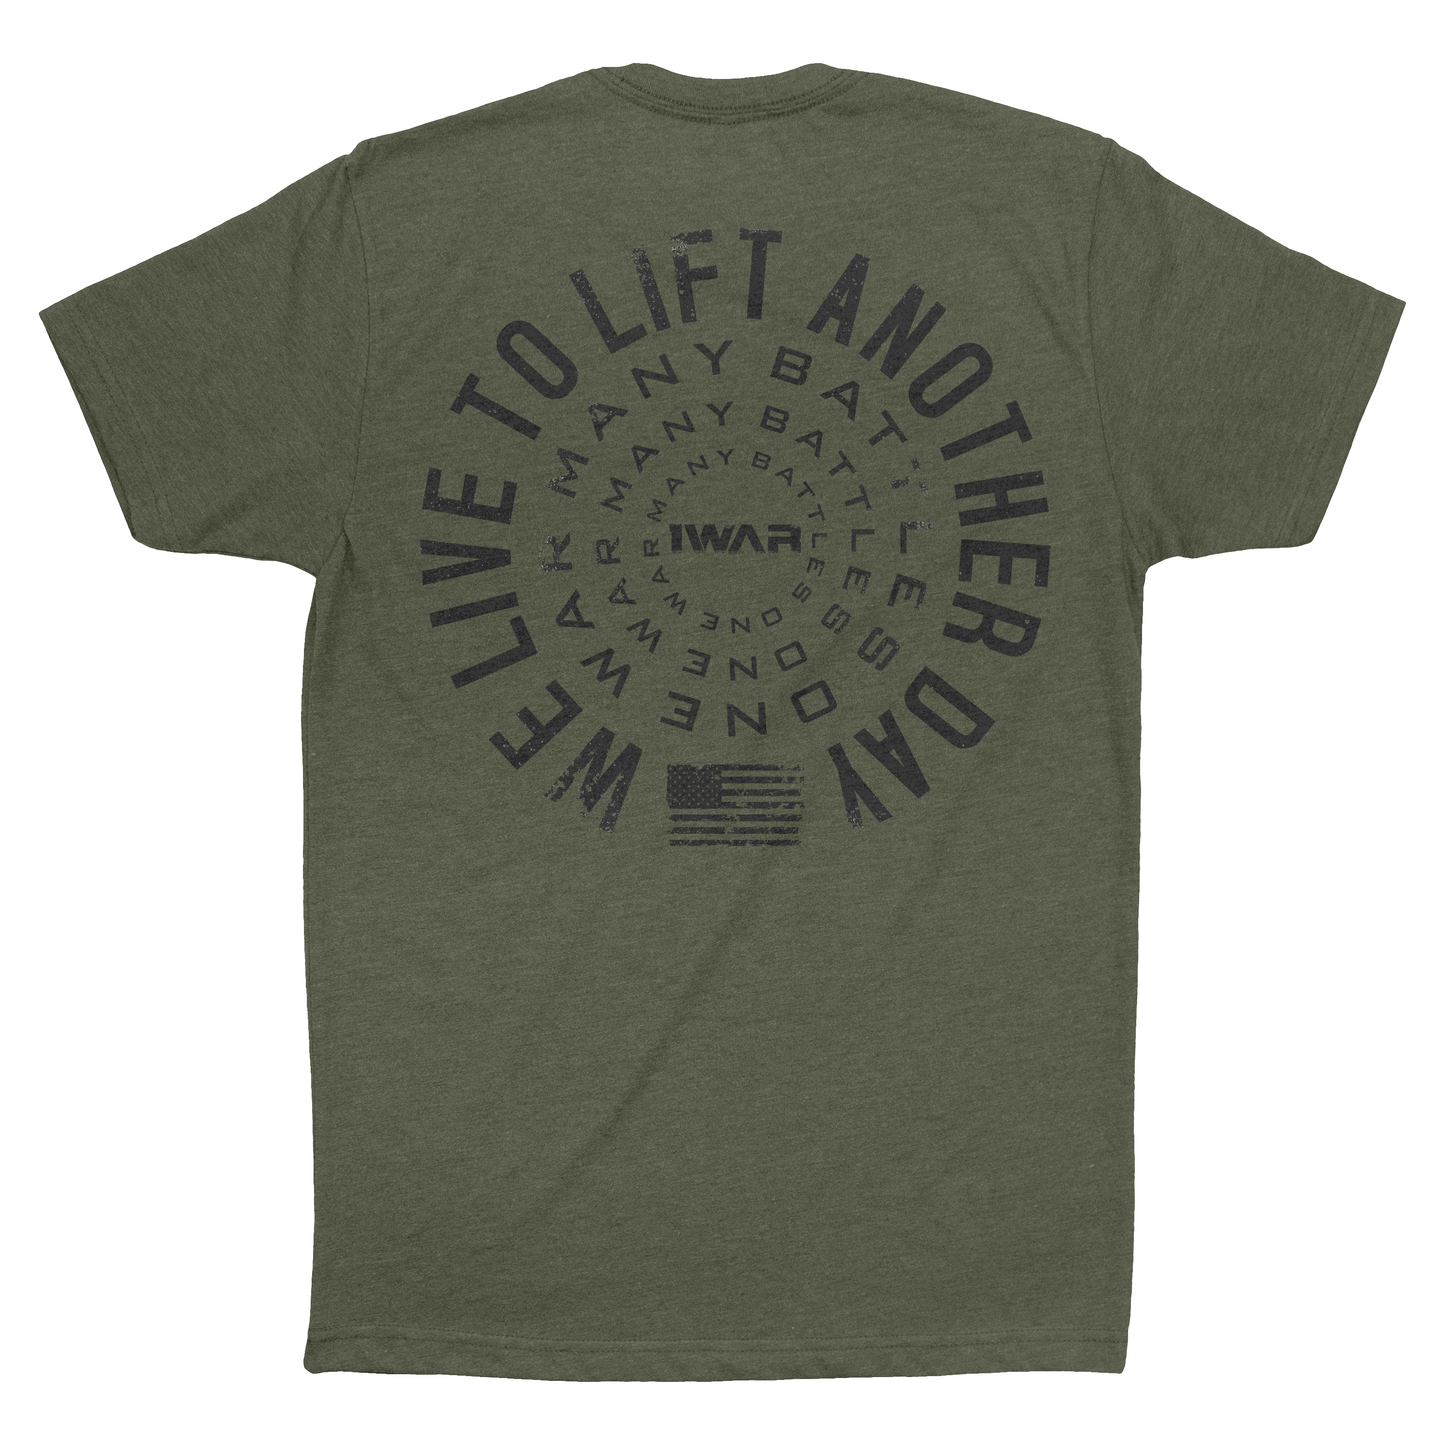 Live to lift another day Tee